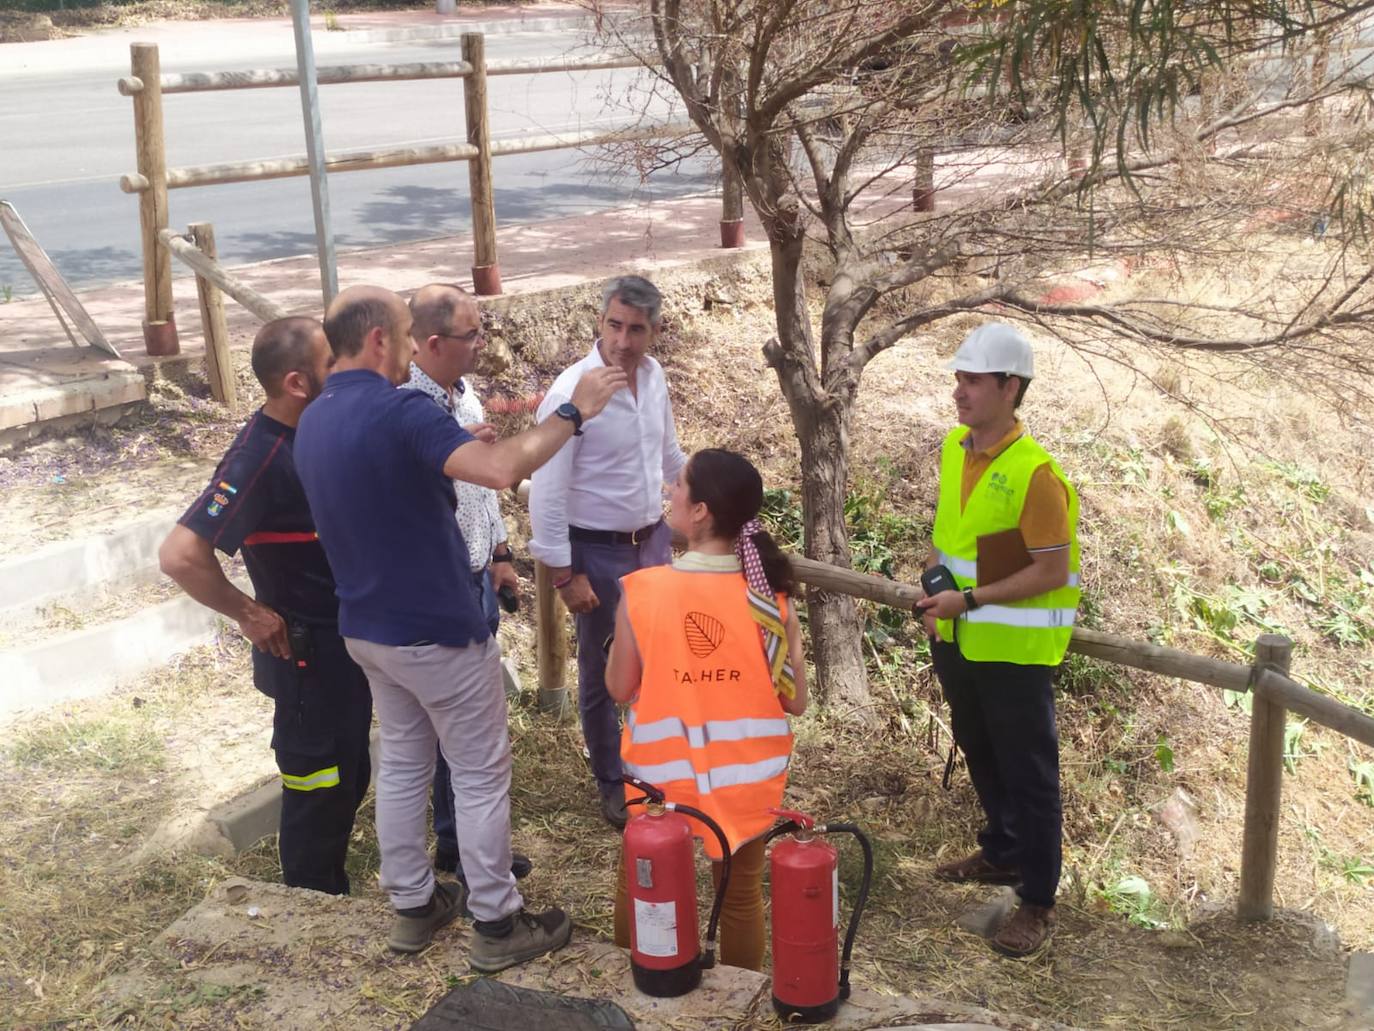 Mayor of Benalmádena visits one of the areas being cleared to prevent summer fires. /SUR